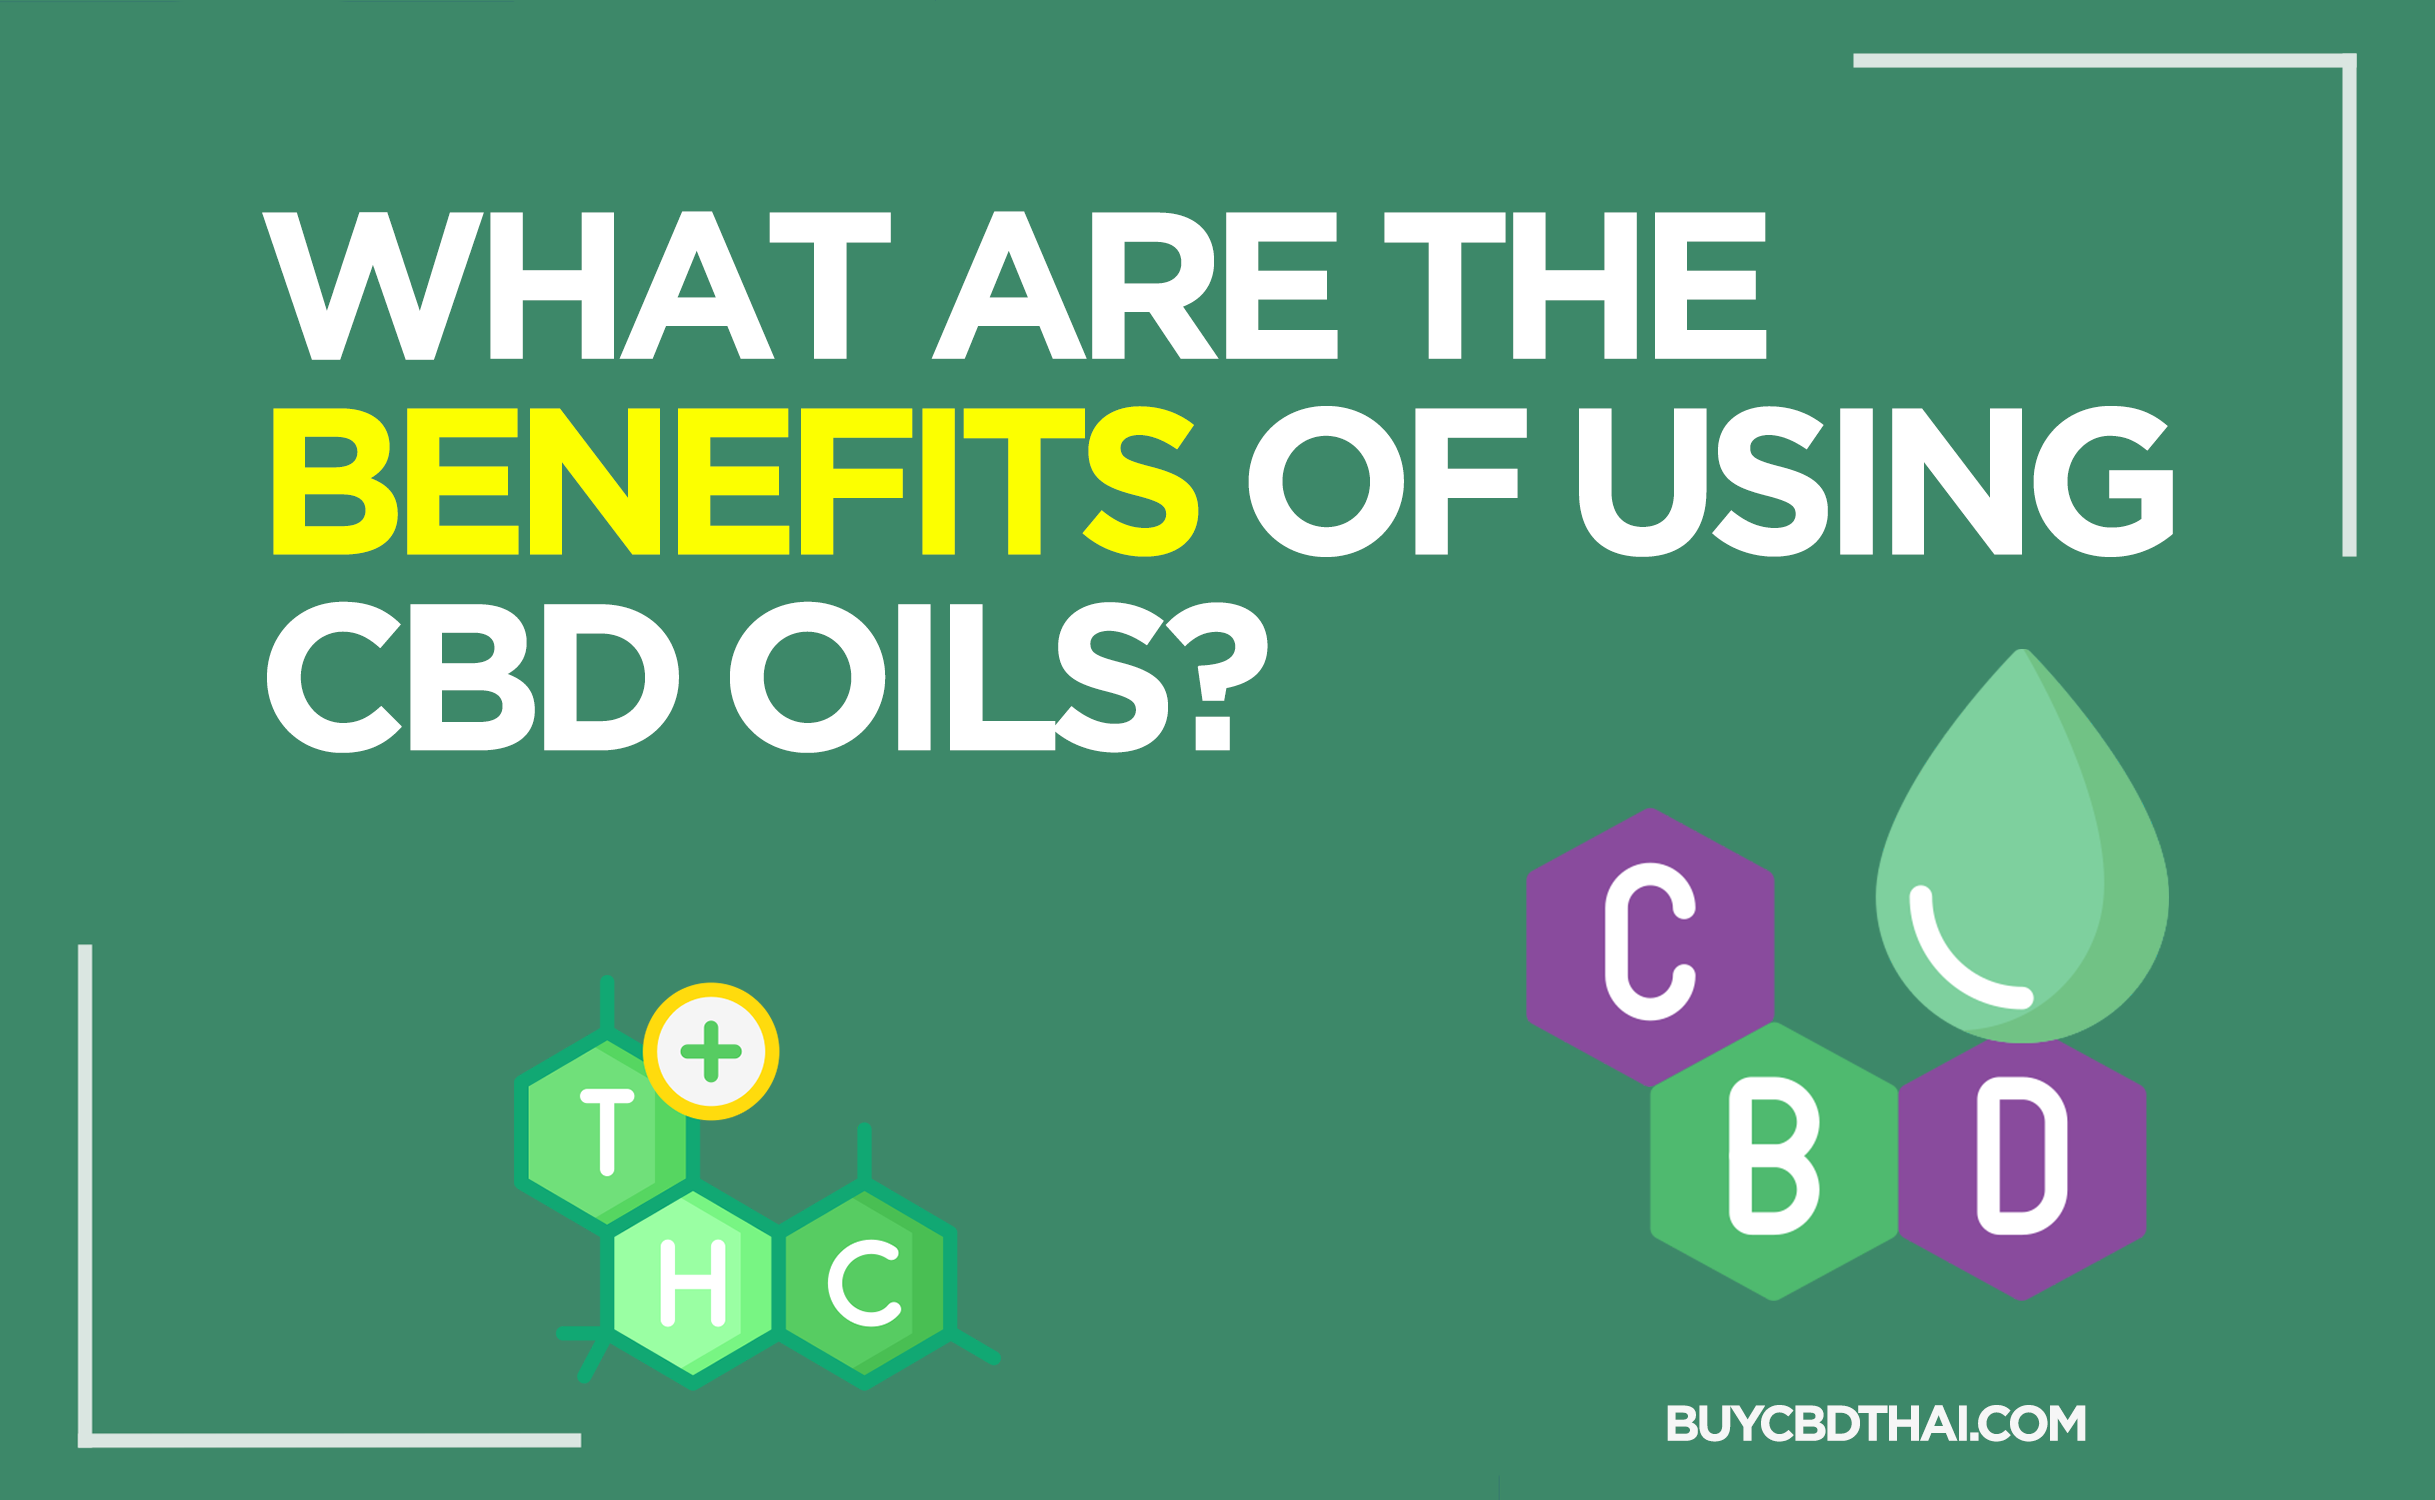 What Are the Benefits of Using CBD Oils?